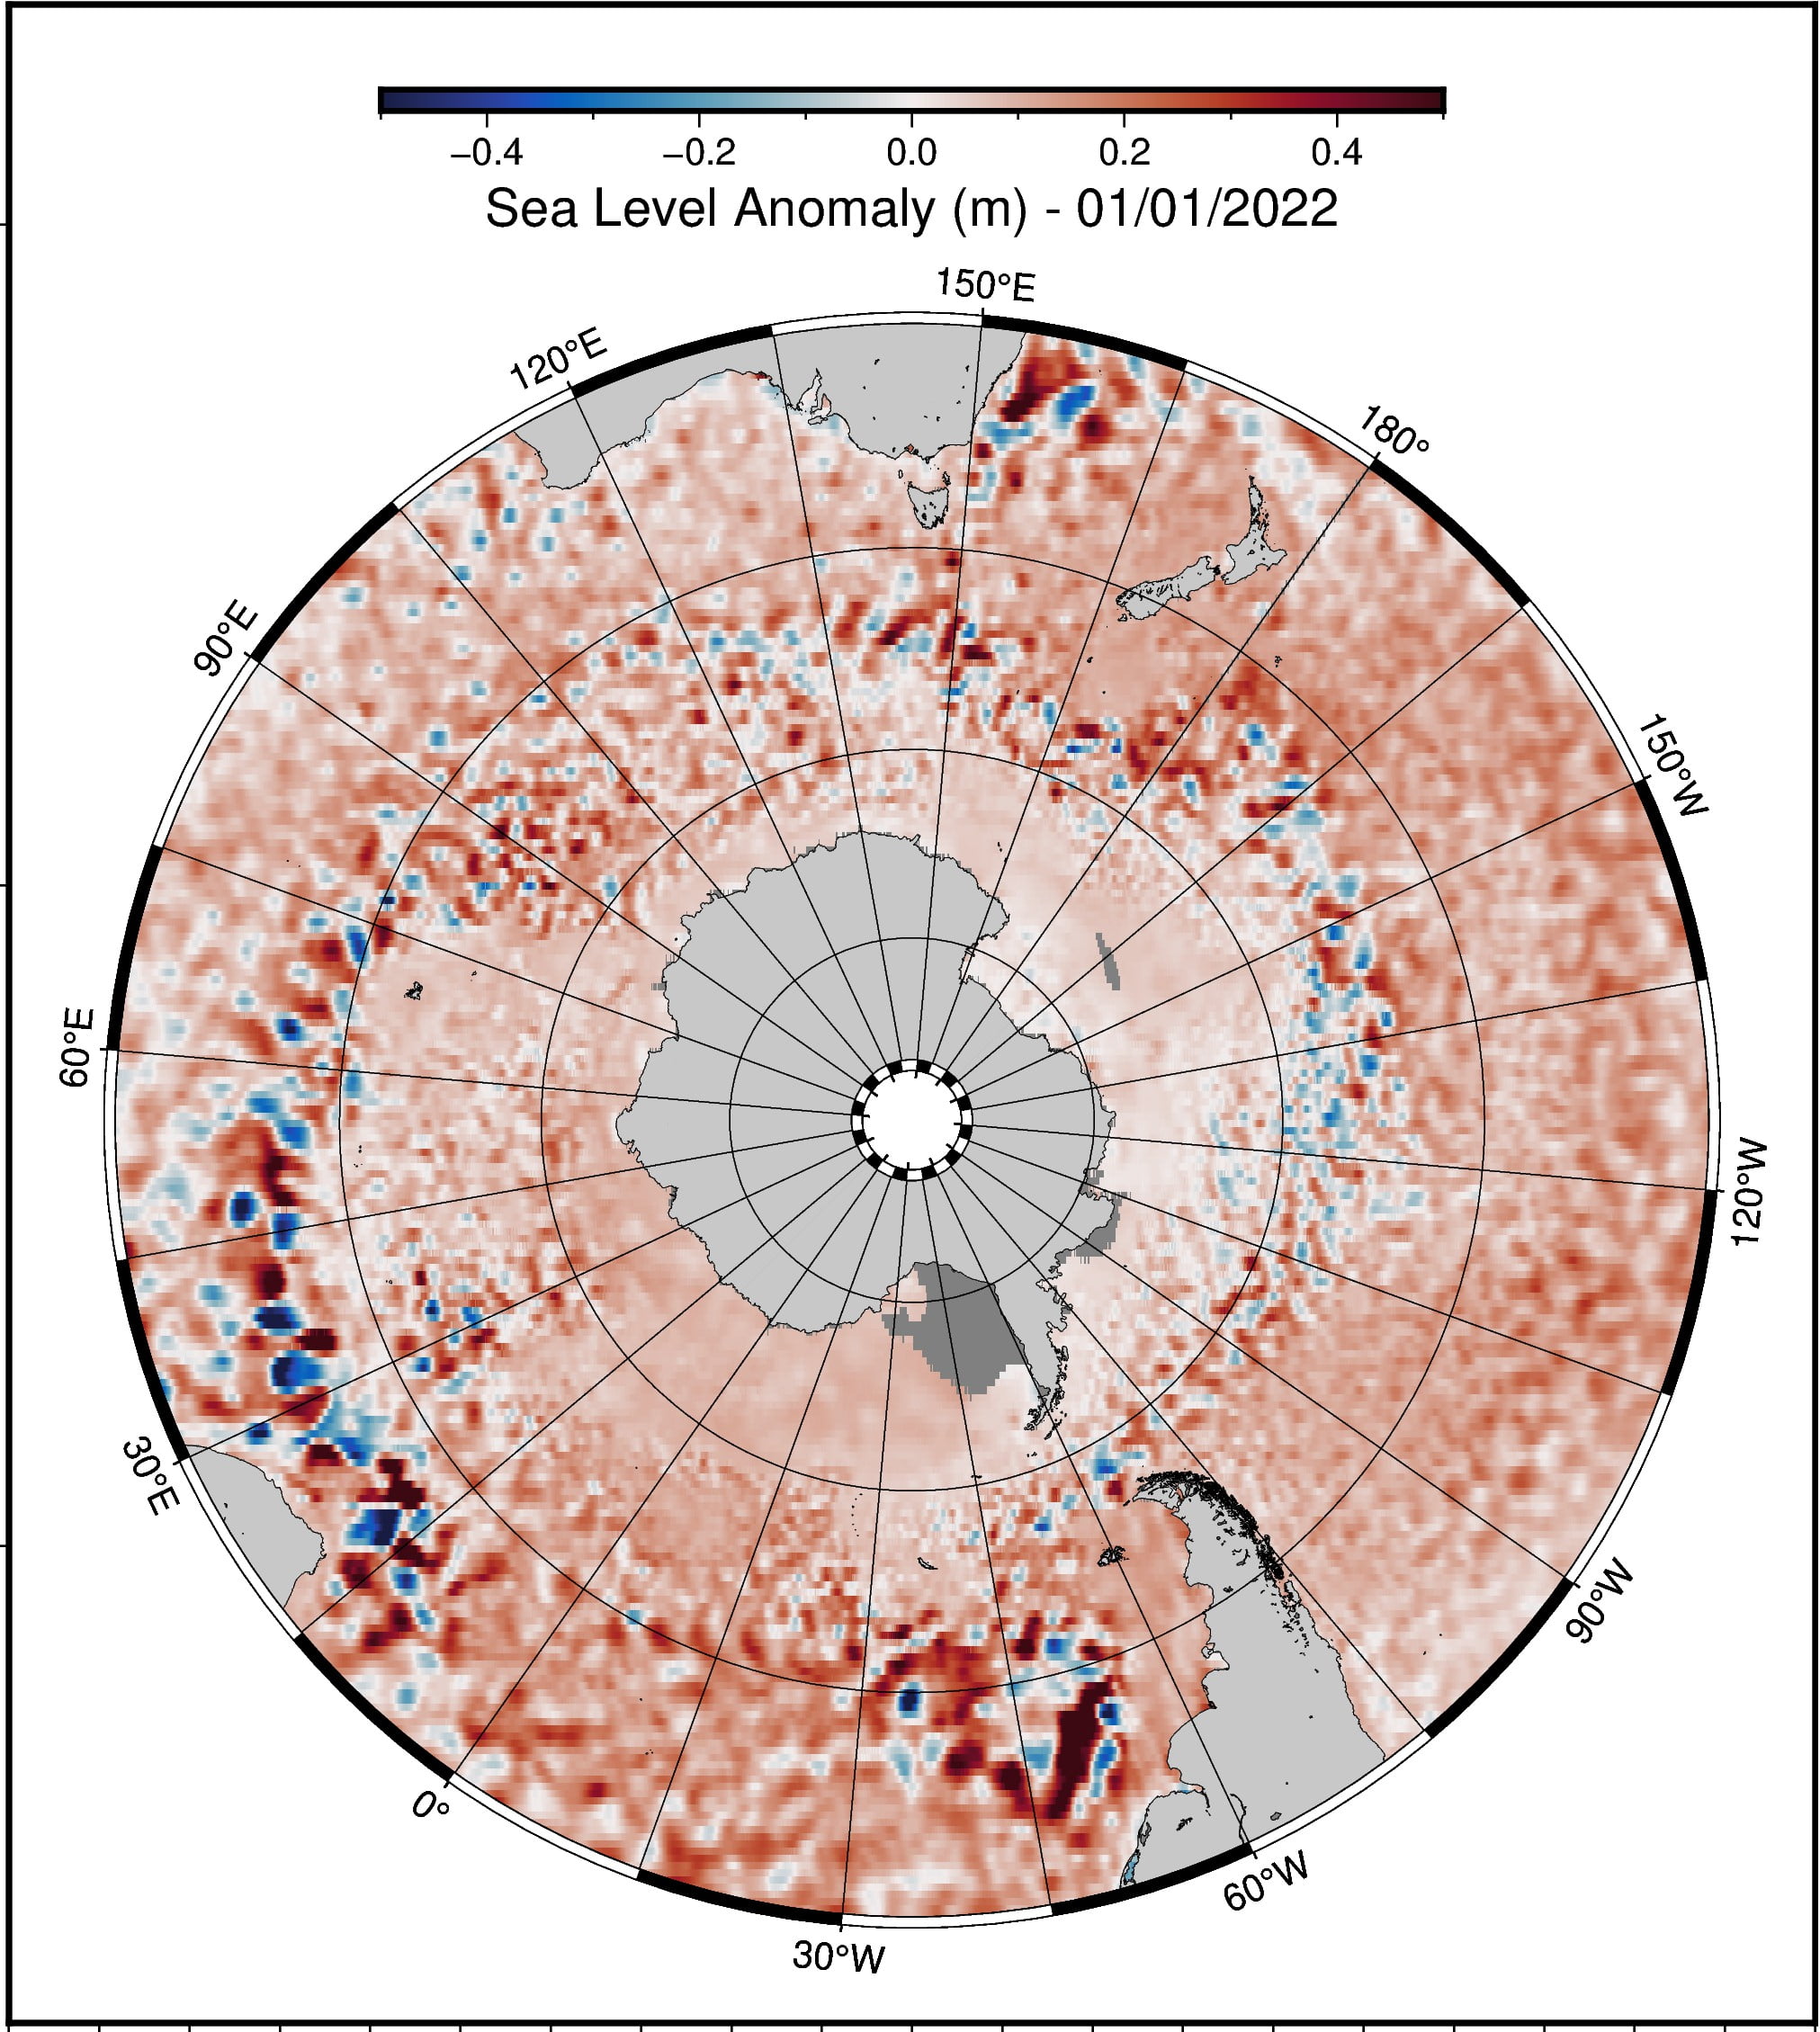 5 Sea level variations over a single day around the Antarctic 1 January 2022